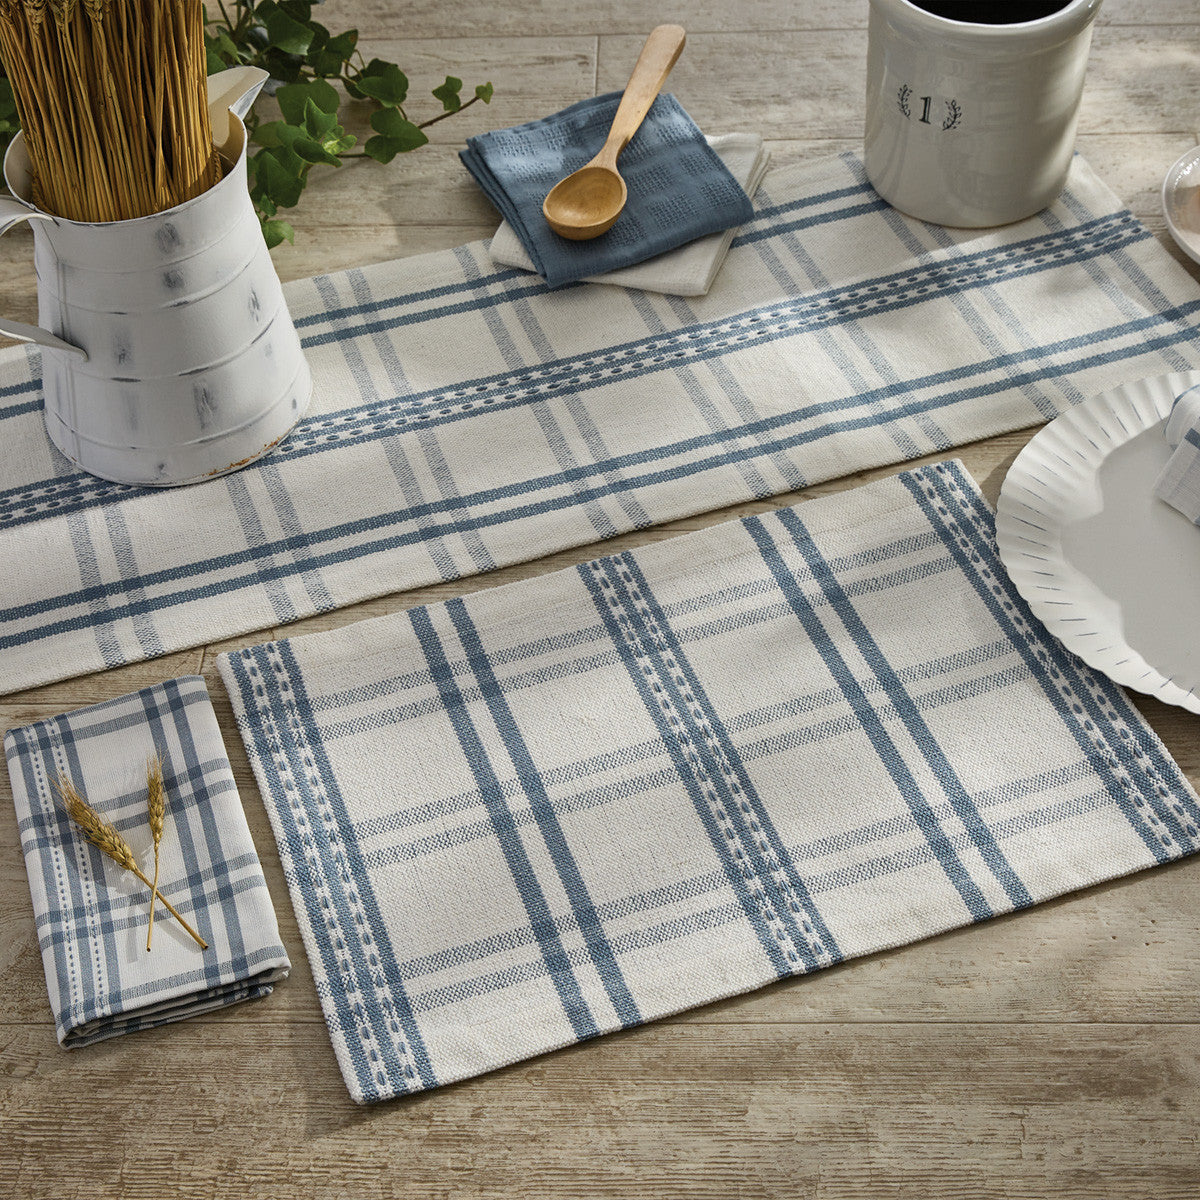 French Farmhouse Table Runner 36"L Set of 2 Park Designs